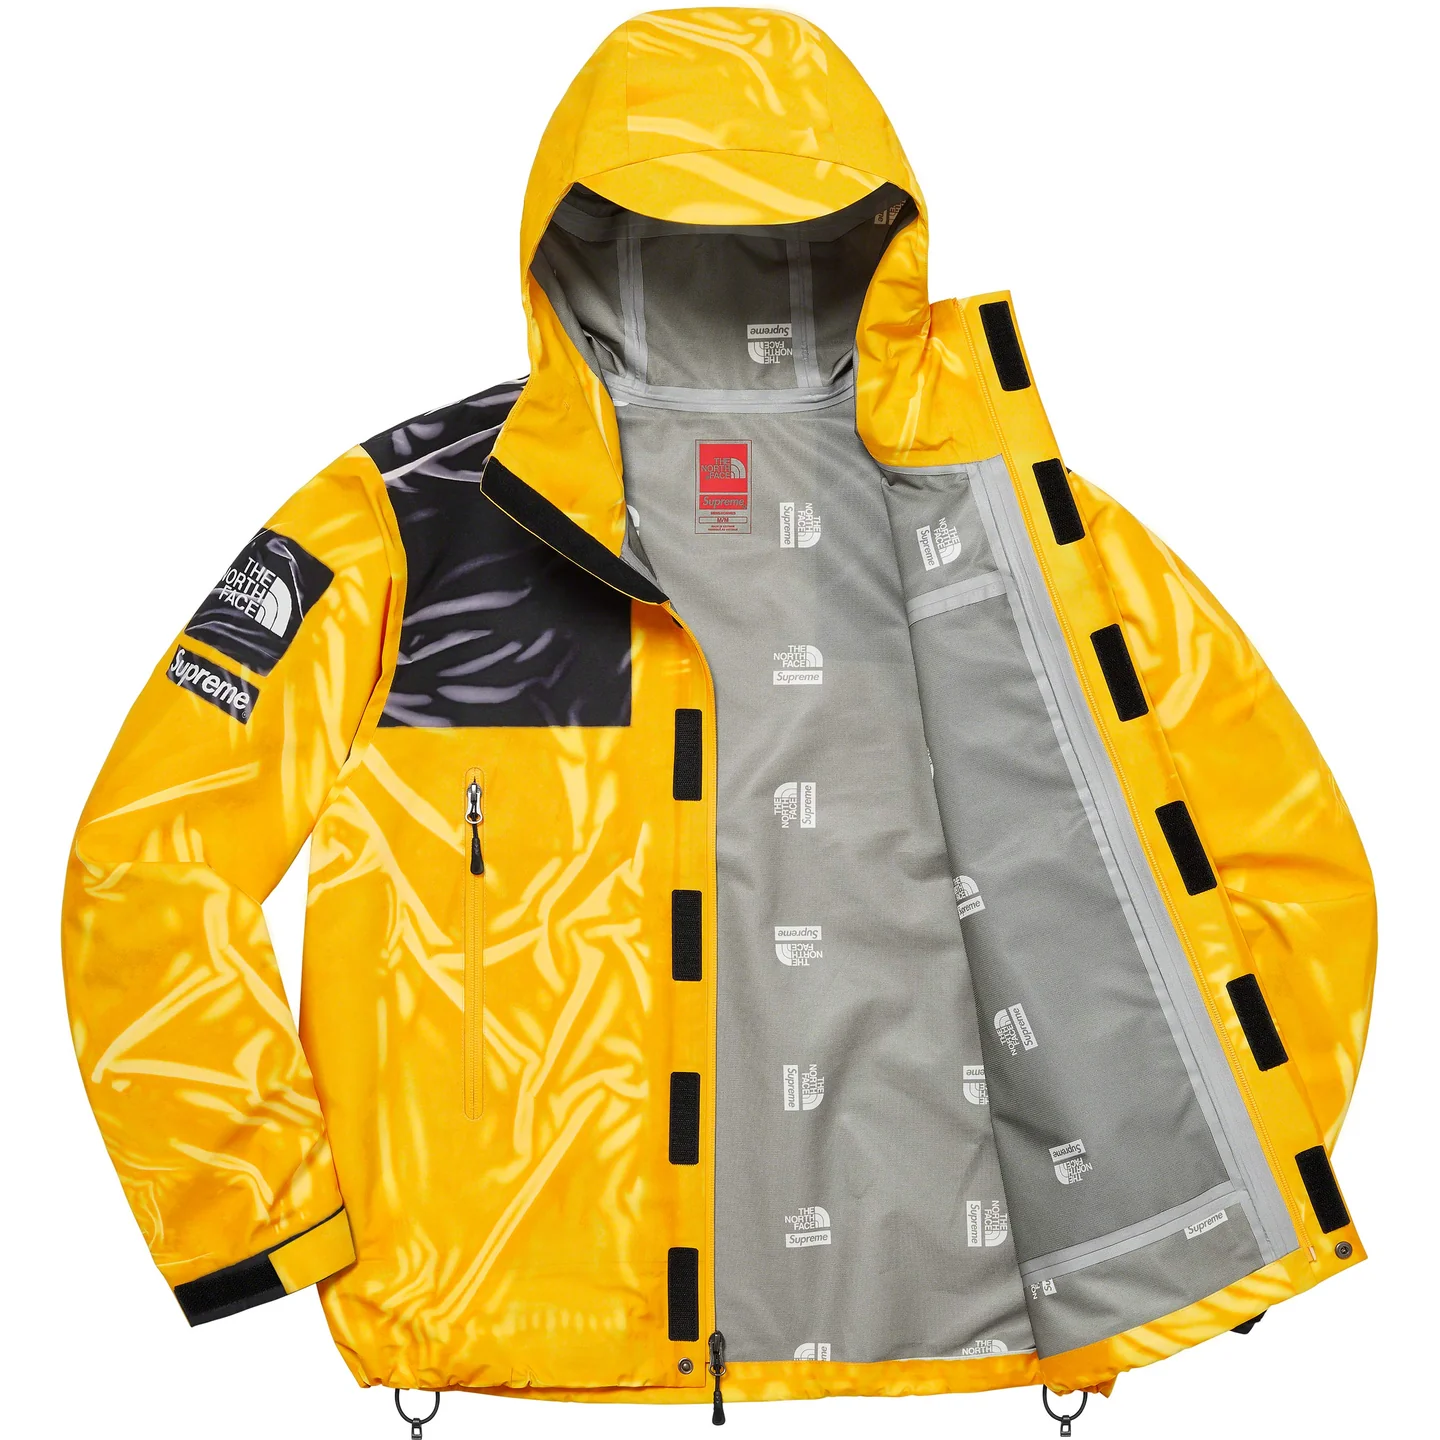 Supreme®/The North Face® Trompe L’oeil Printed Taped Seam Shell Jacket